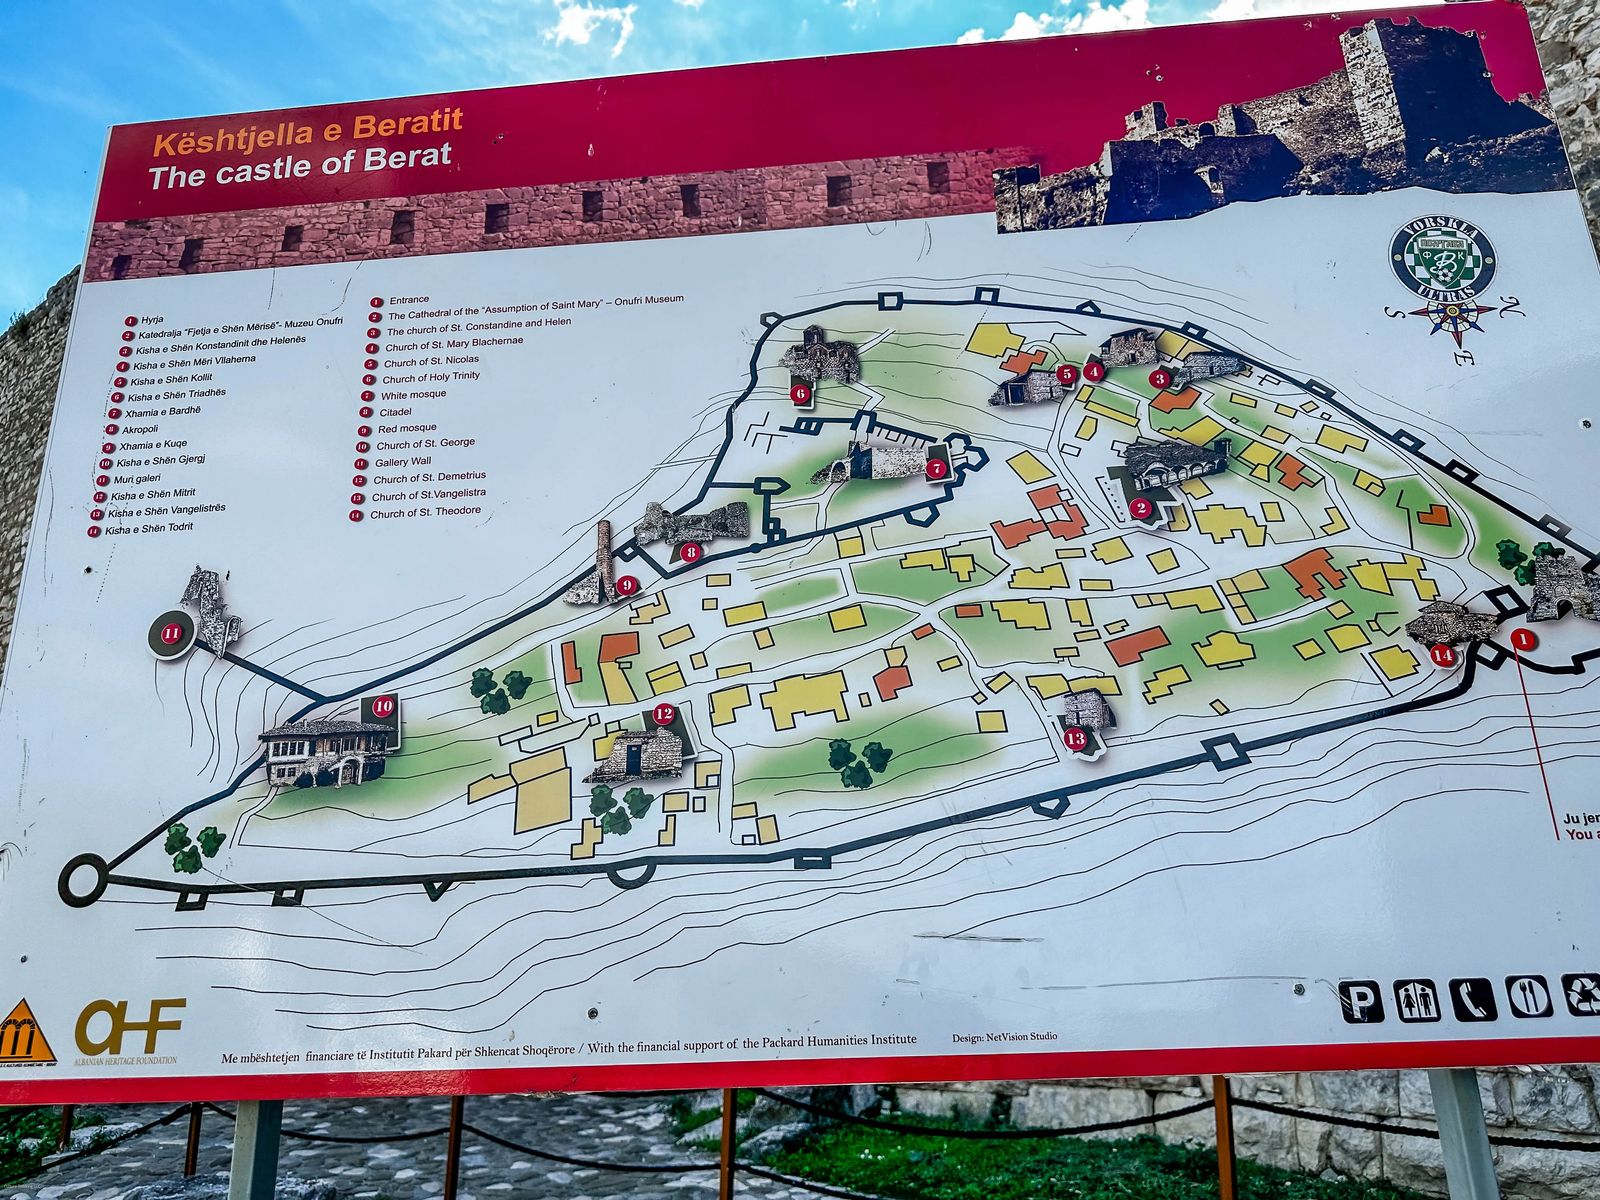 Map of Berat Castle - Things to see in berat Albania in one day